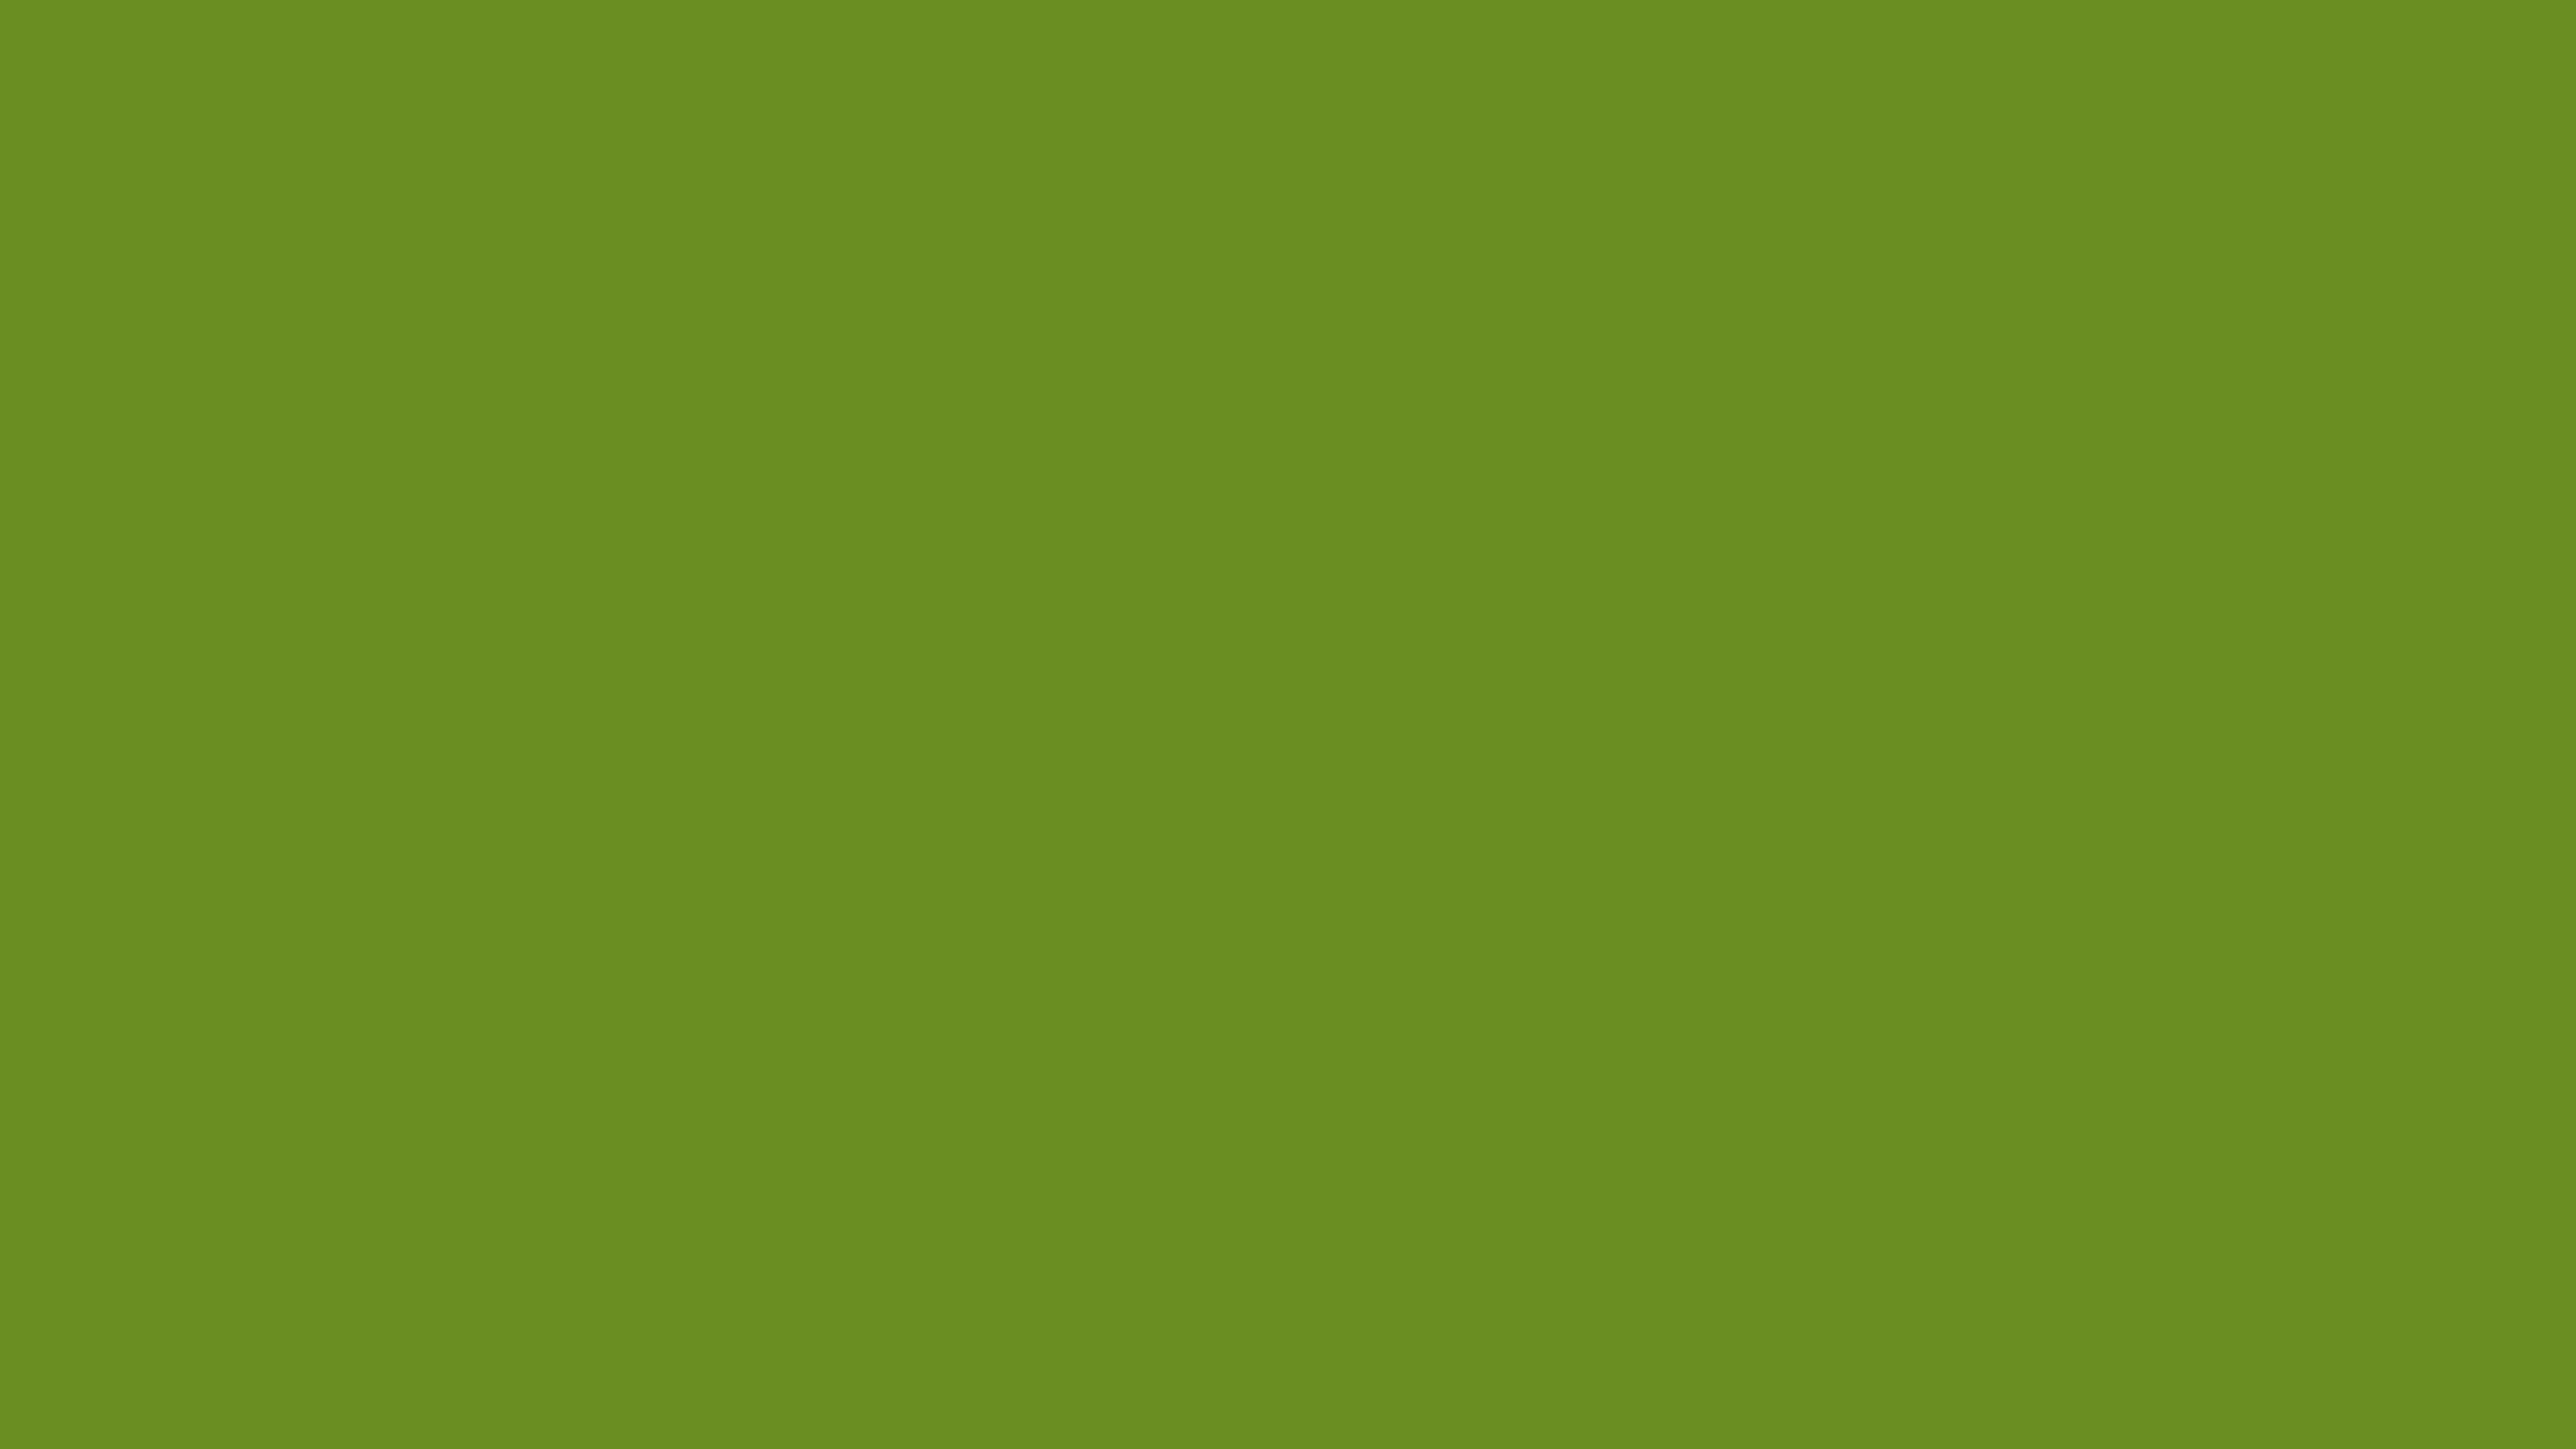 7680x4320 Olive Drab Number Three Solid Color Background